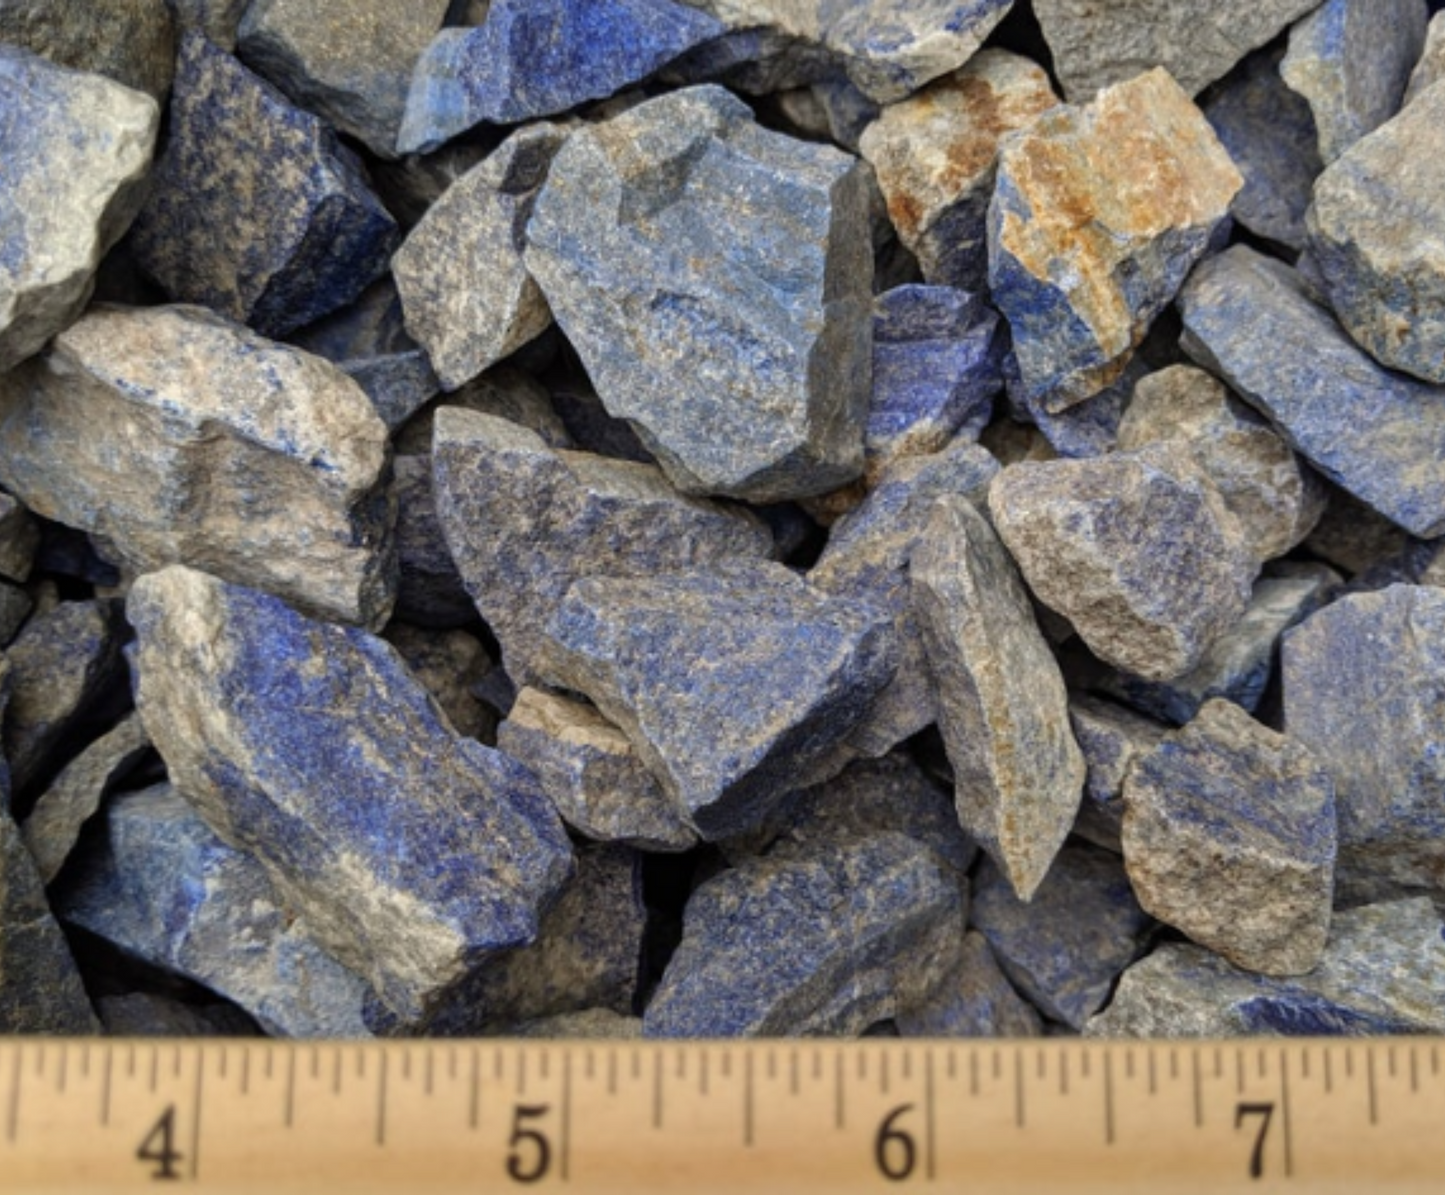 Lapis Lazuli Rough Rocks from Pakistan | Raw Crystals for Tumbling